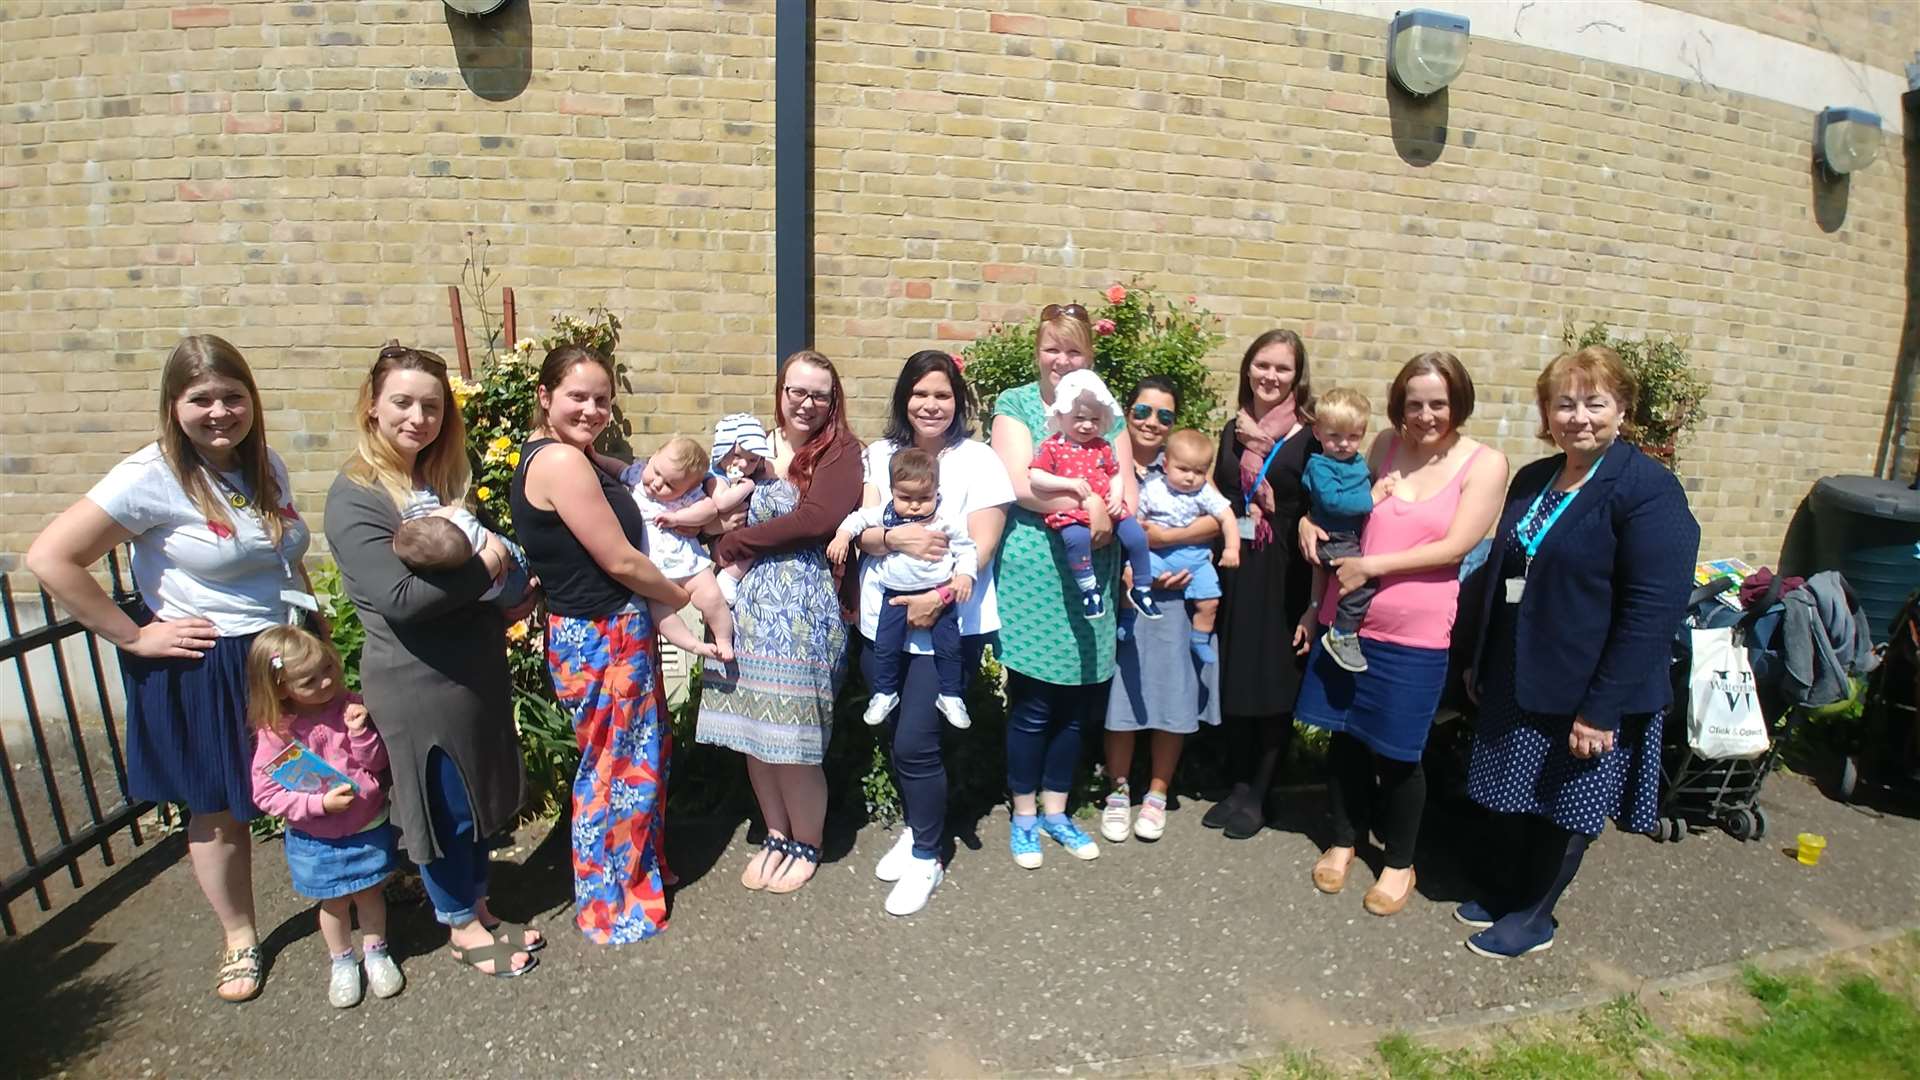 Hannah Croft (left) and Lyn Scazafabo (on the right) from PS Breastfeeding with mums at the breastfeeding session at St Andrew's Church in Canterbury. (10528474)